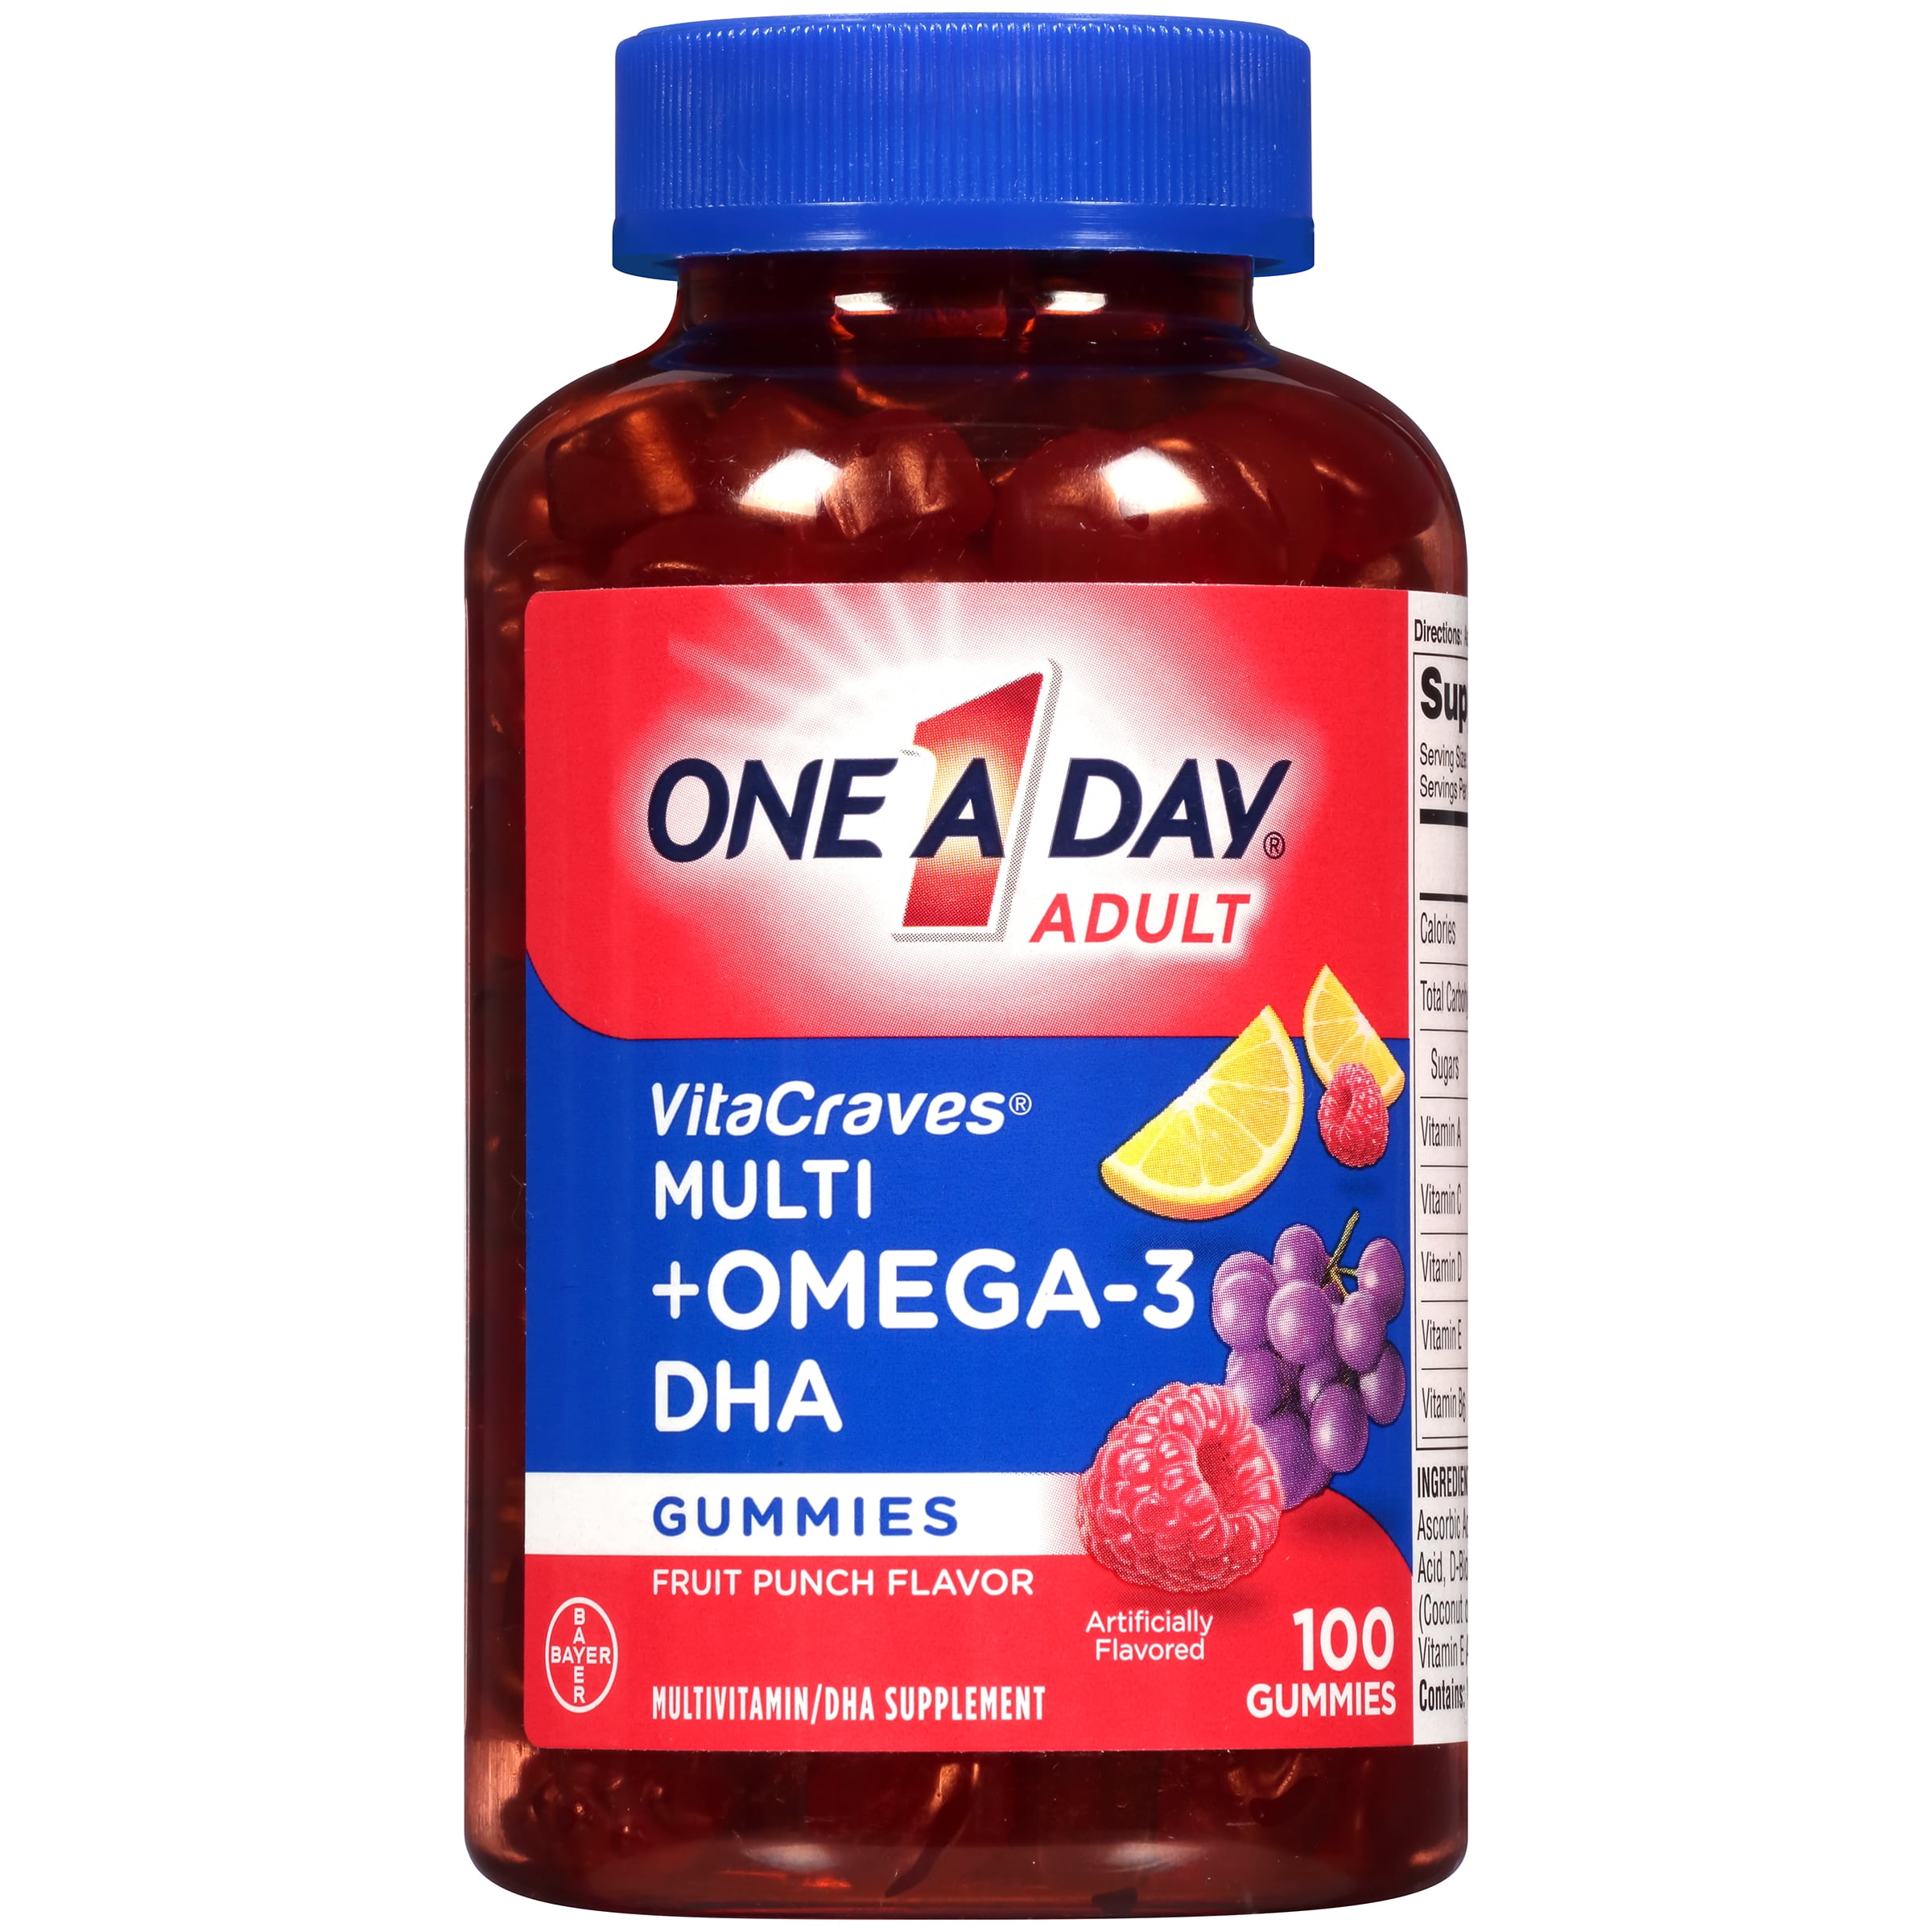 One A Day VitaCraves Multivitamin Gummies Plus Omega 3 DHA, Supplement ...